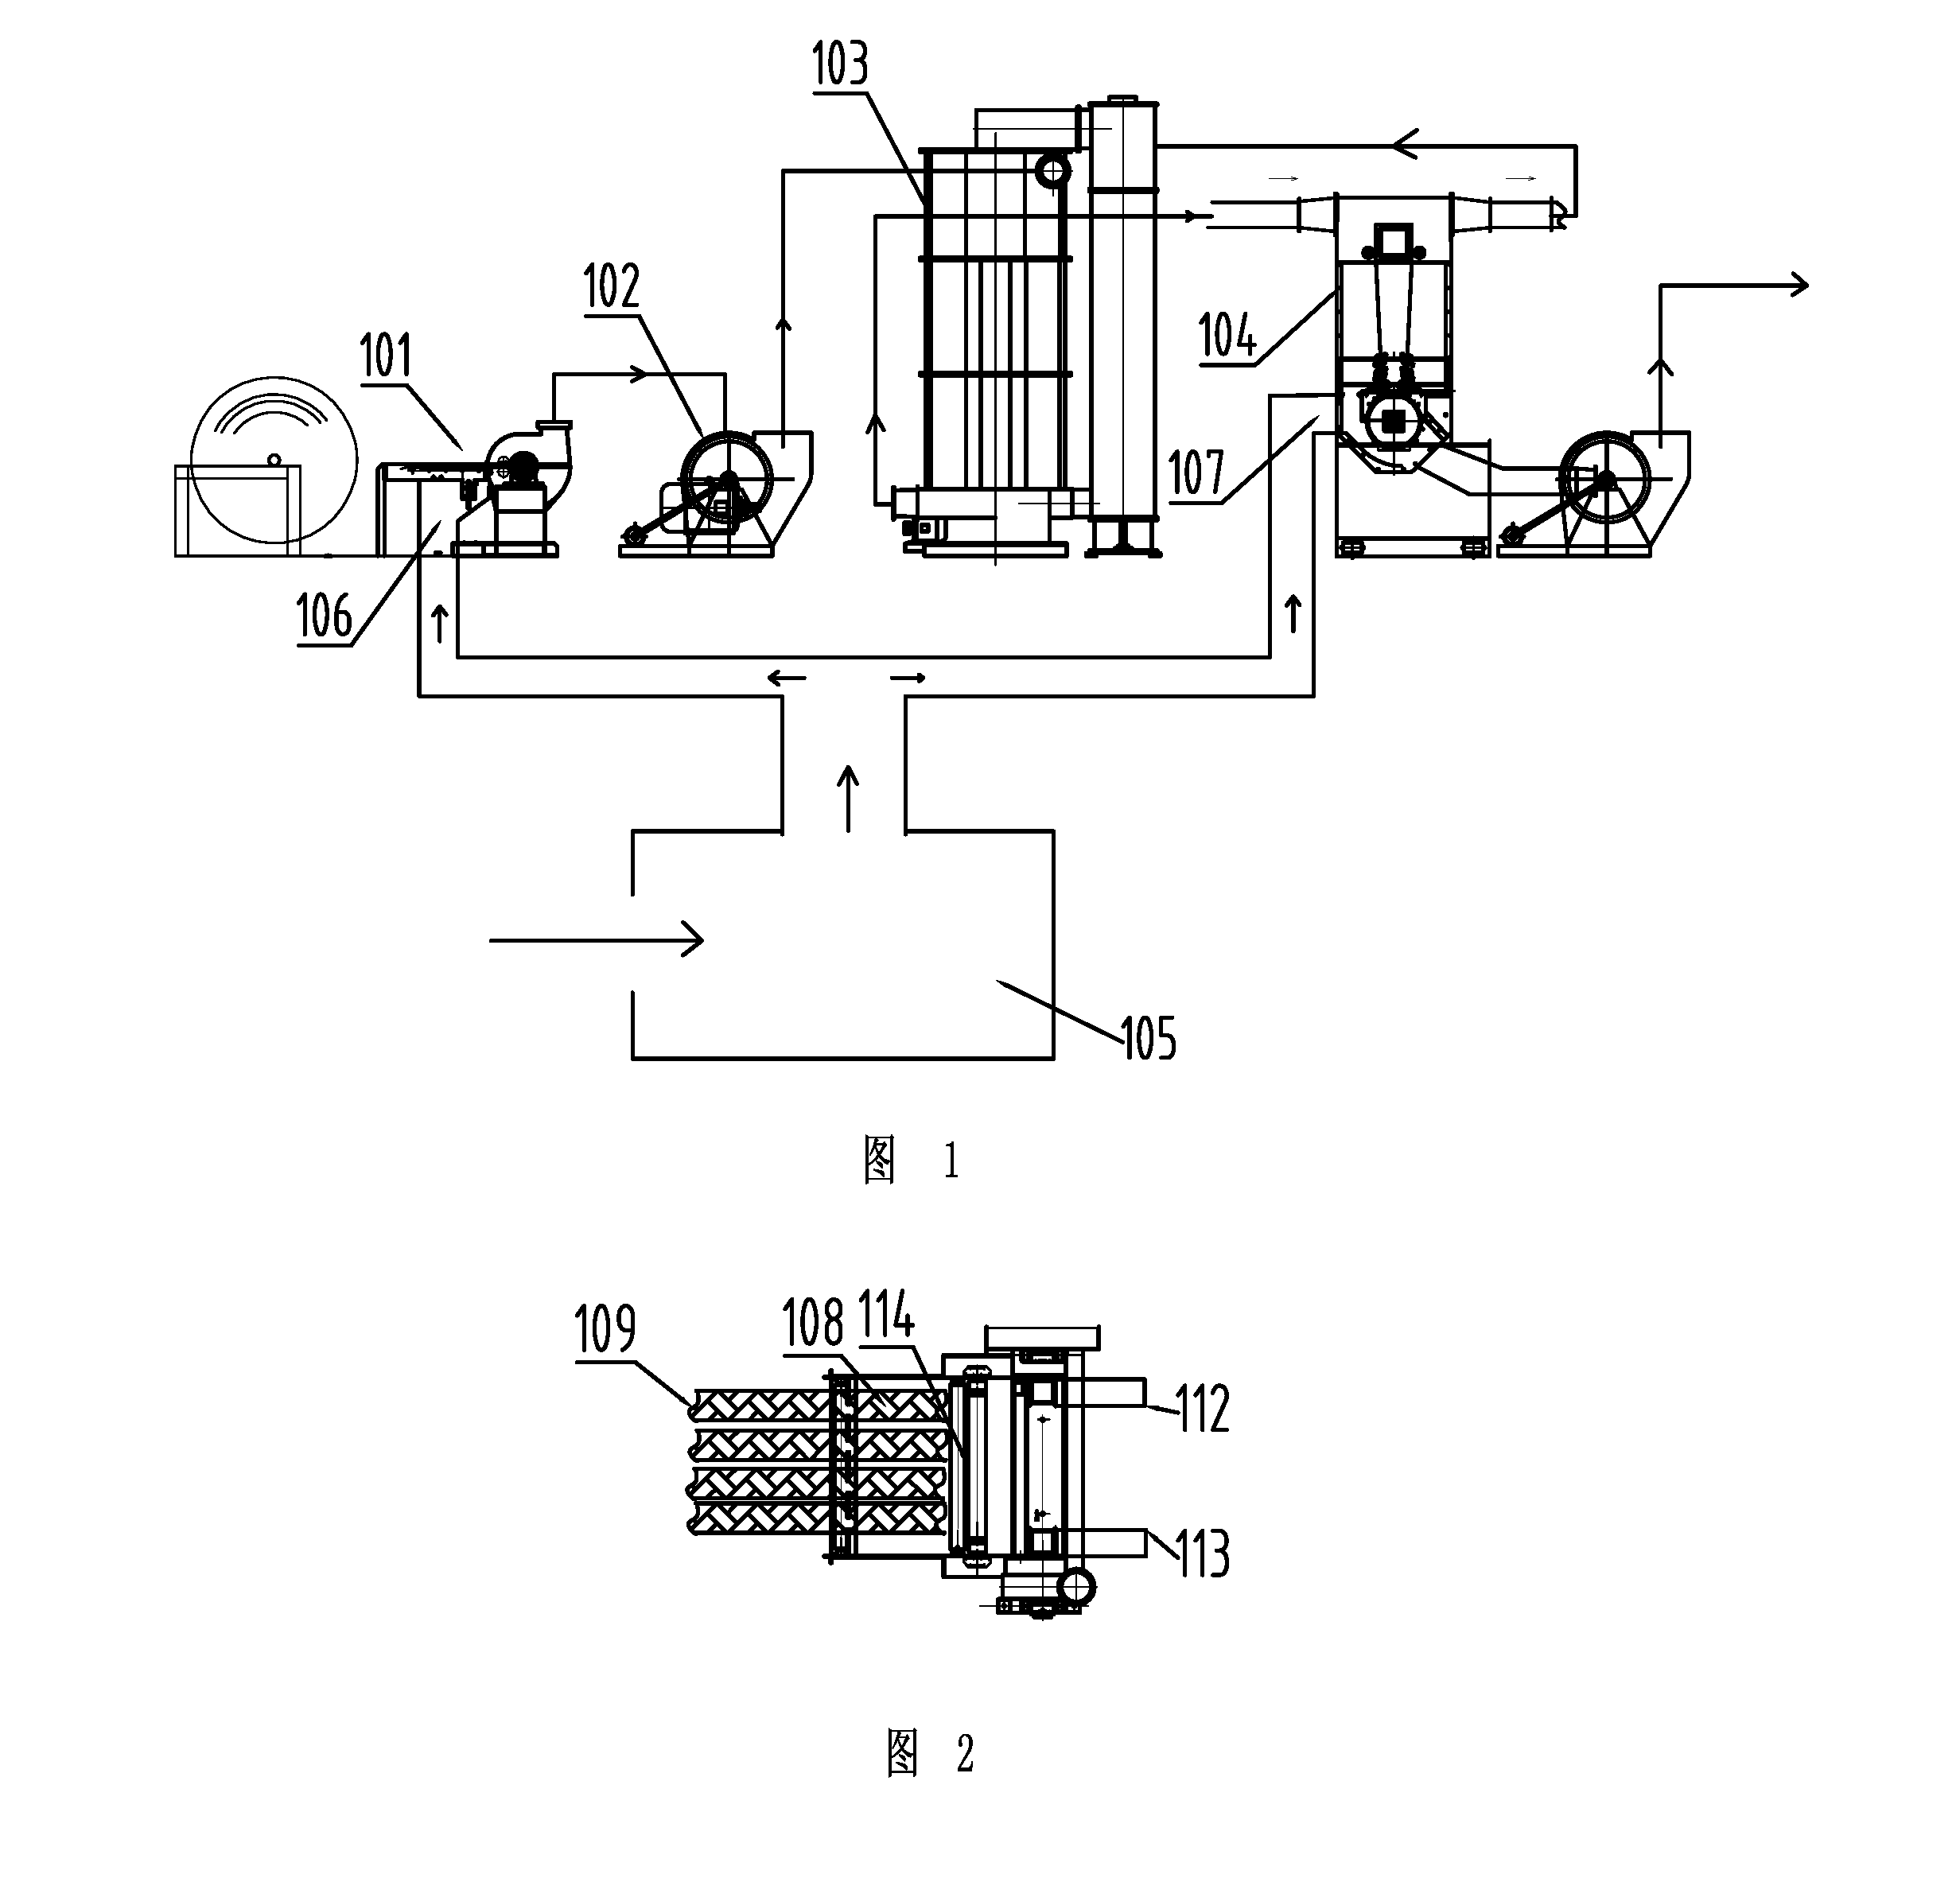 Apparatus for producing reconstituted tobacco sheet via dry paper-making method